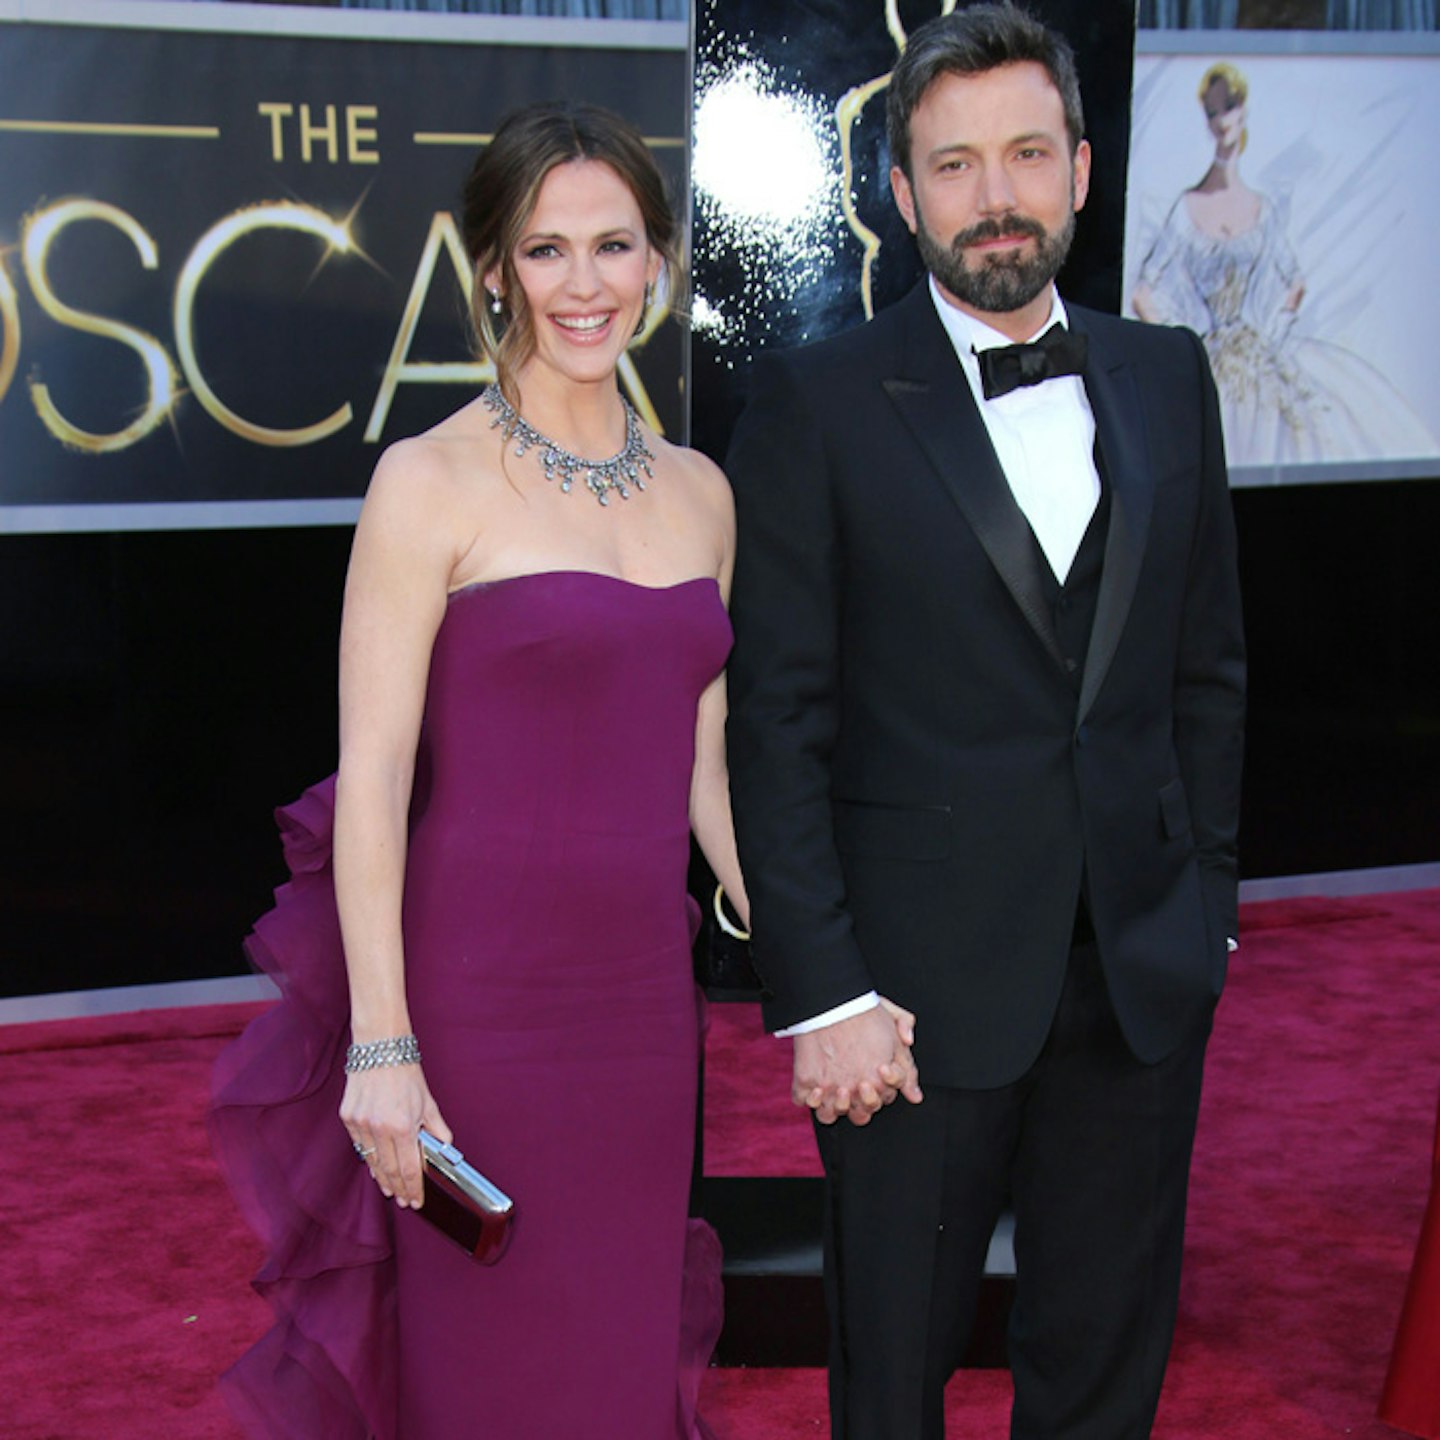 Jennifer Garner and Ben Affleck pictured at this years Oscars in February